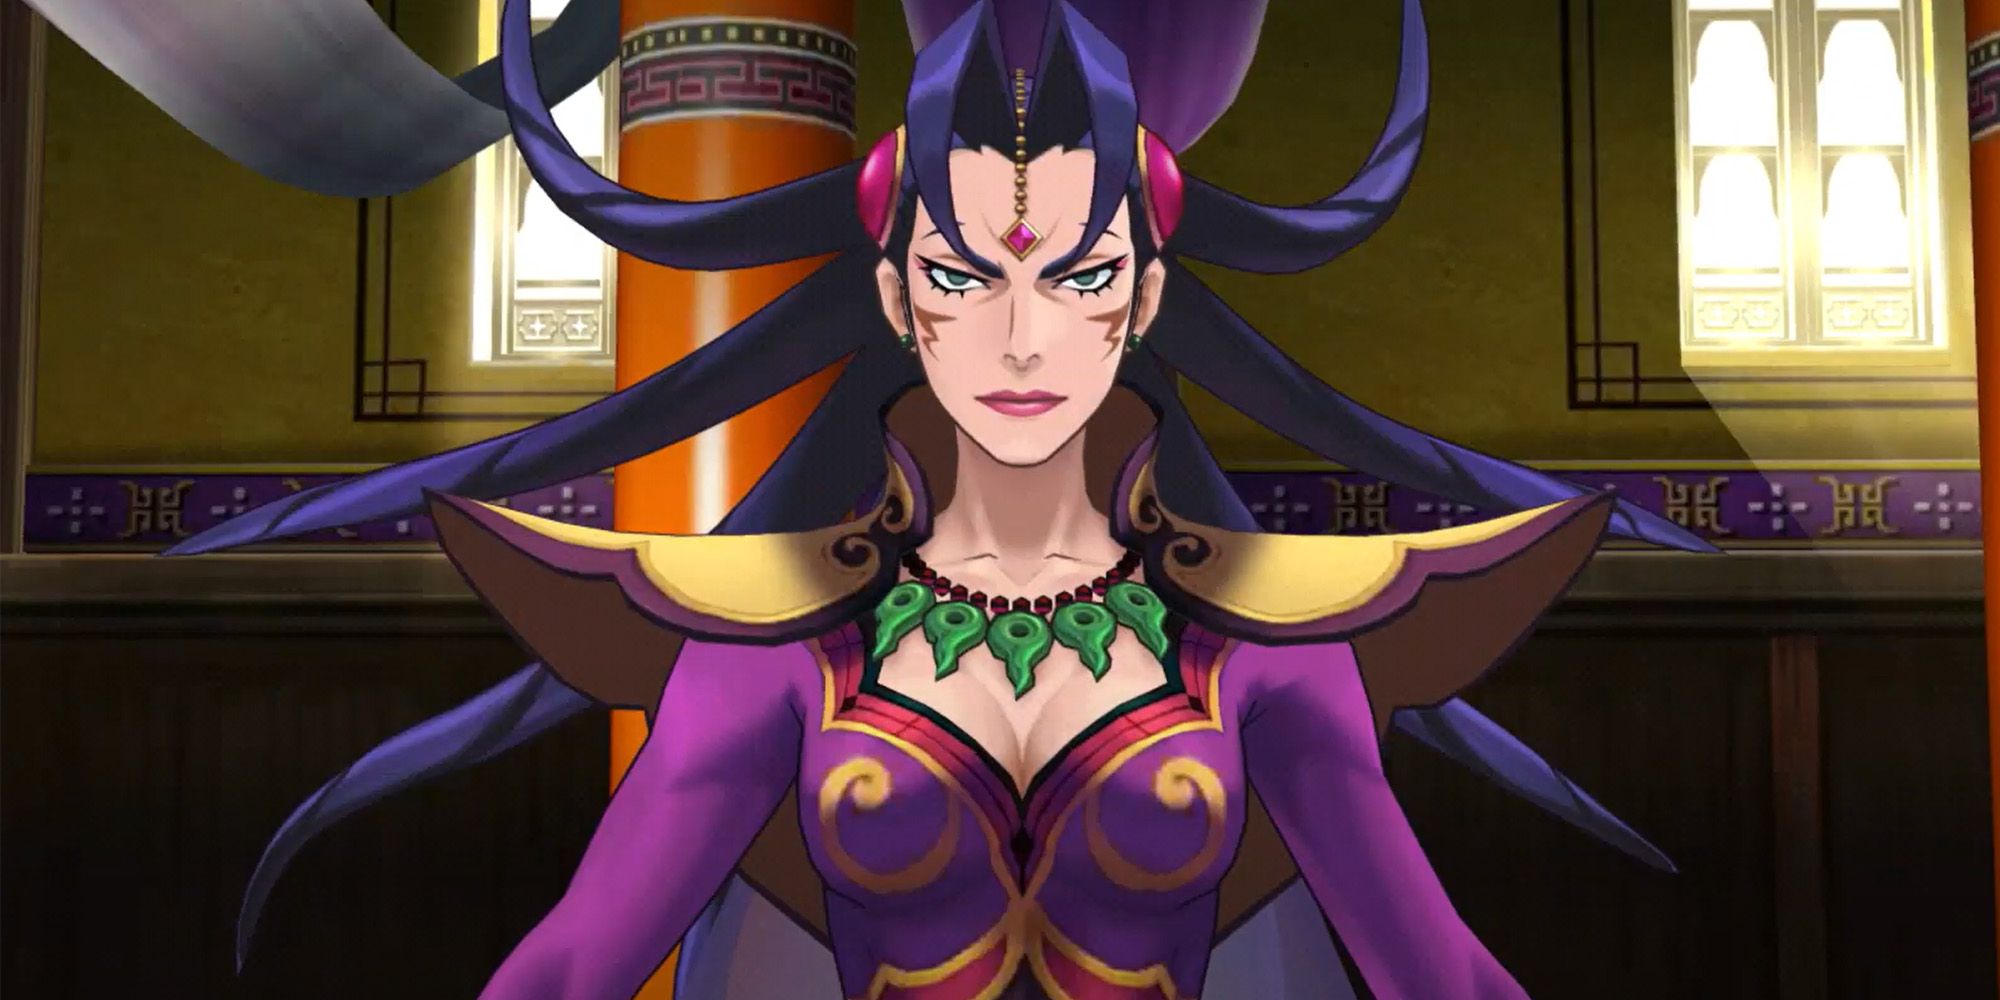 Queen Ga'ran from Apollo Justice Ace Attorney Trilogy